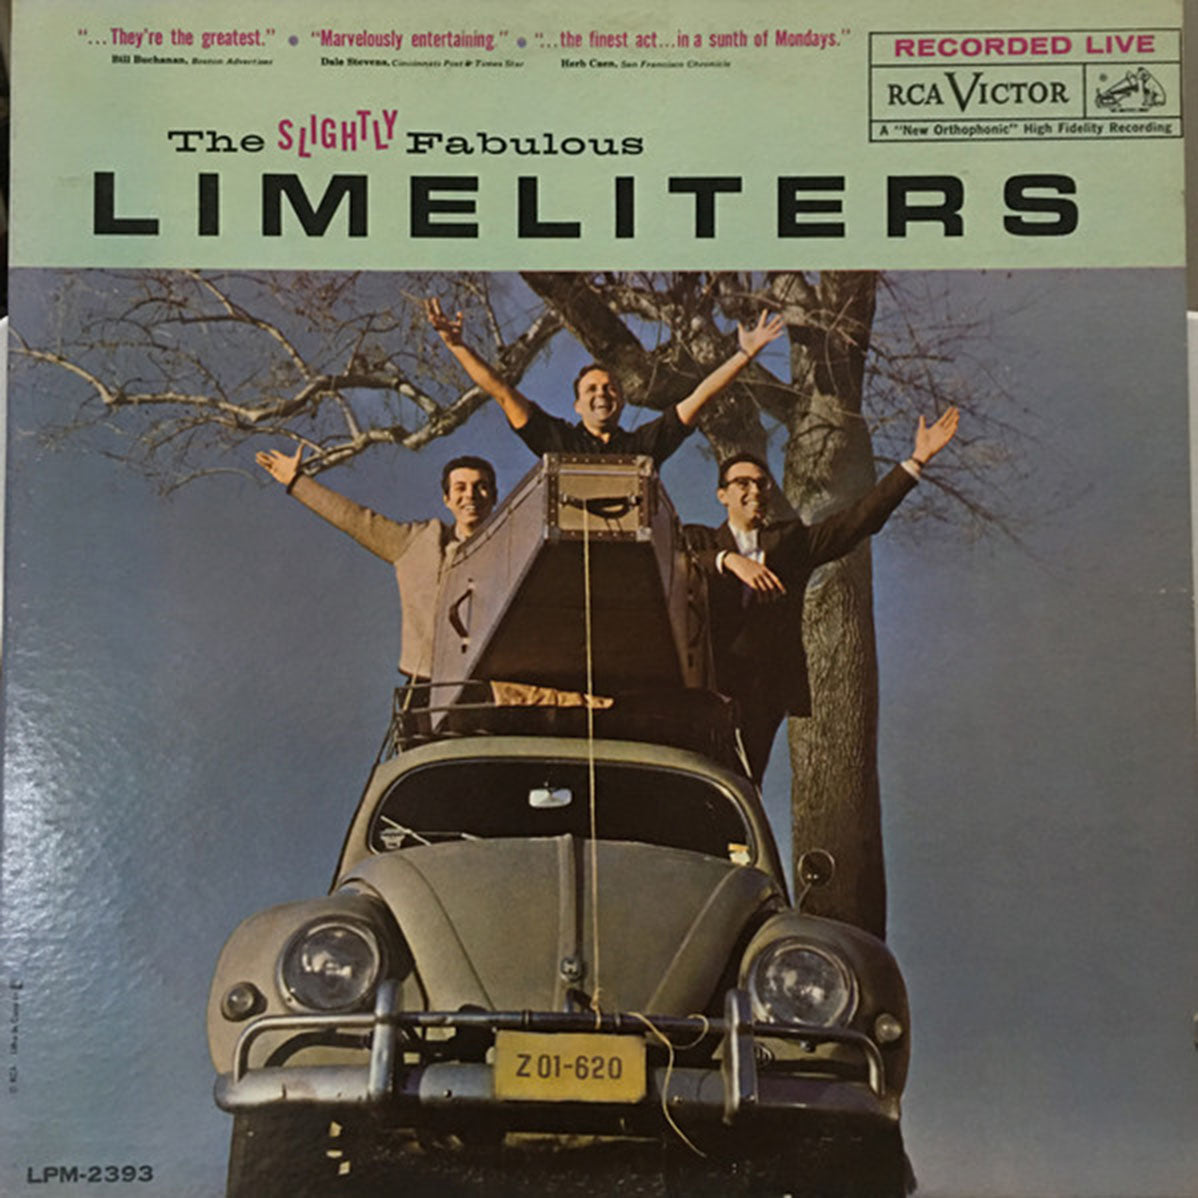 The Limeliters – The Slightly Fabulous Limeliters